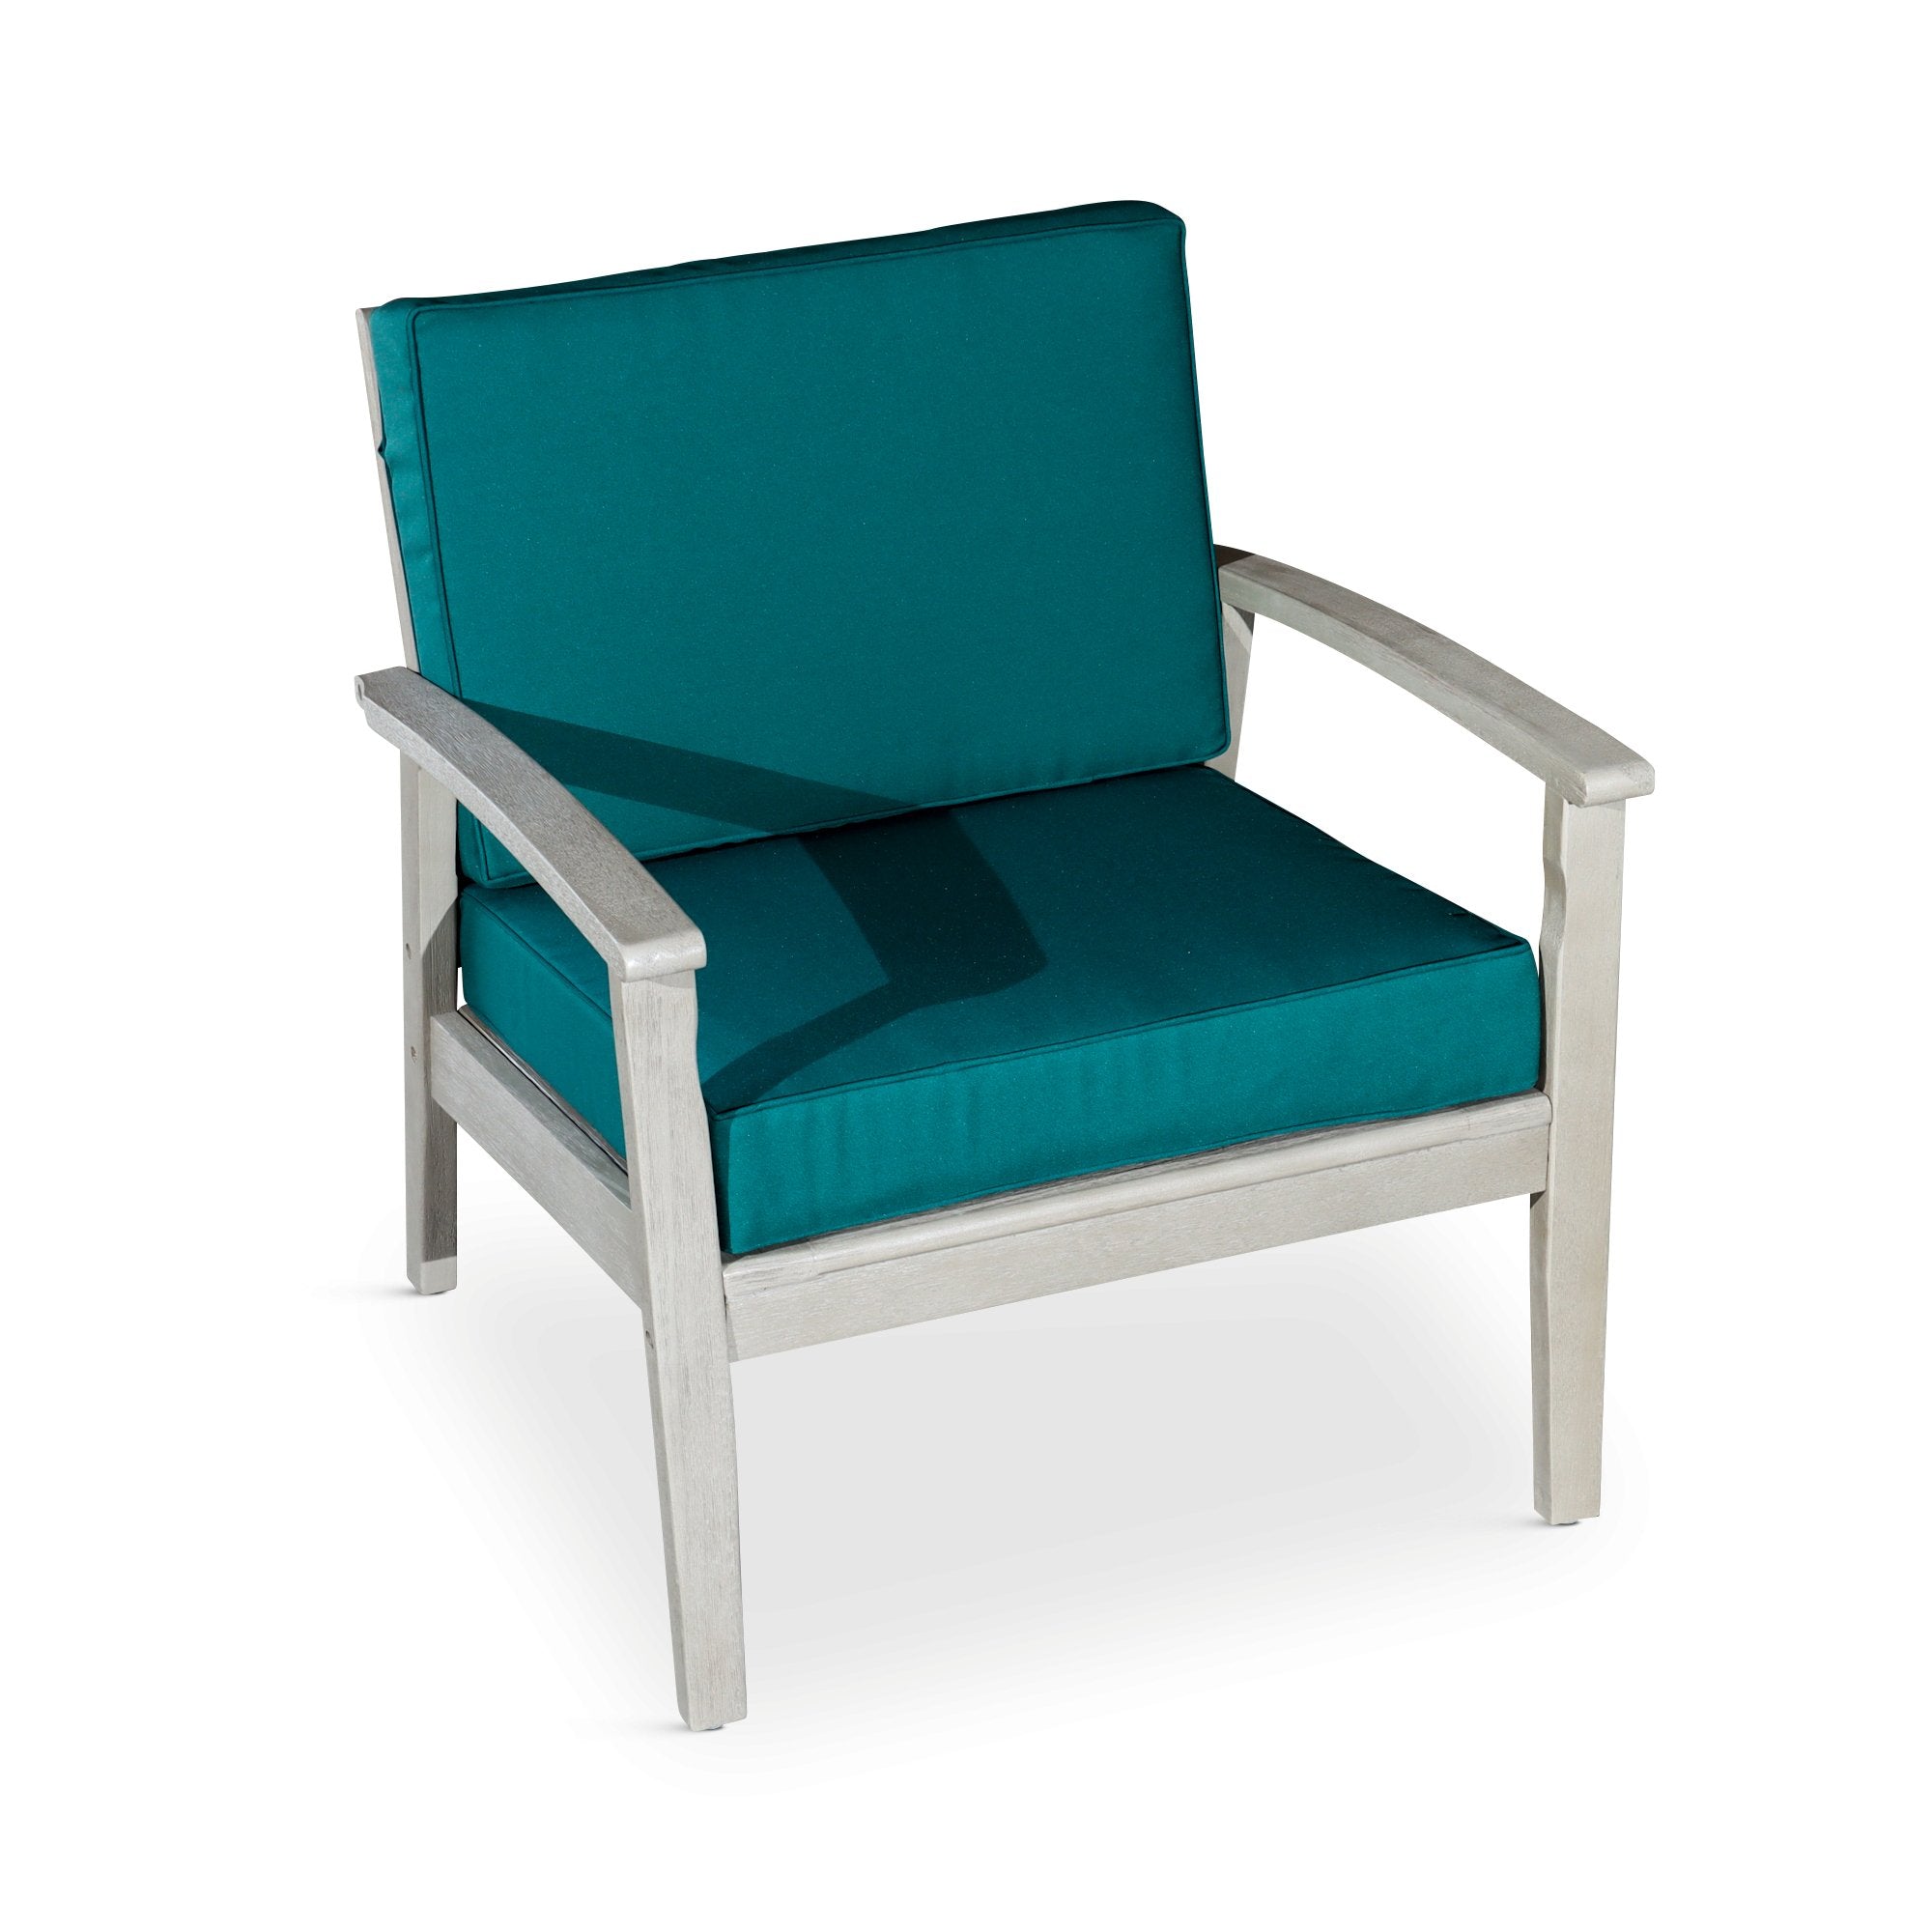 Deep Seat Outdoor Chair, Driftwood Gray Finish, Dark Green Cushions - Tuesday Morning-Chairs & Seating